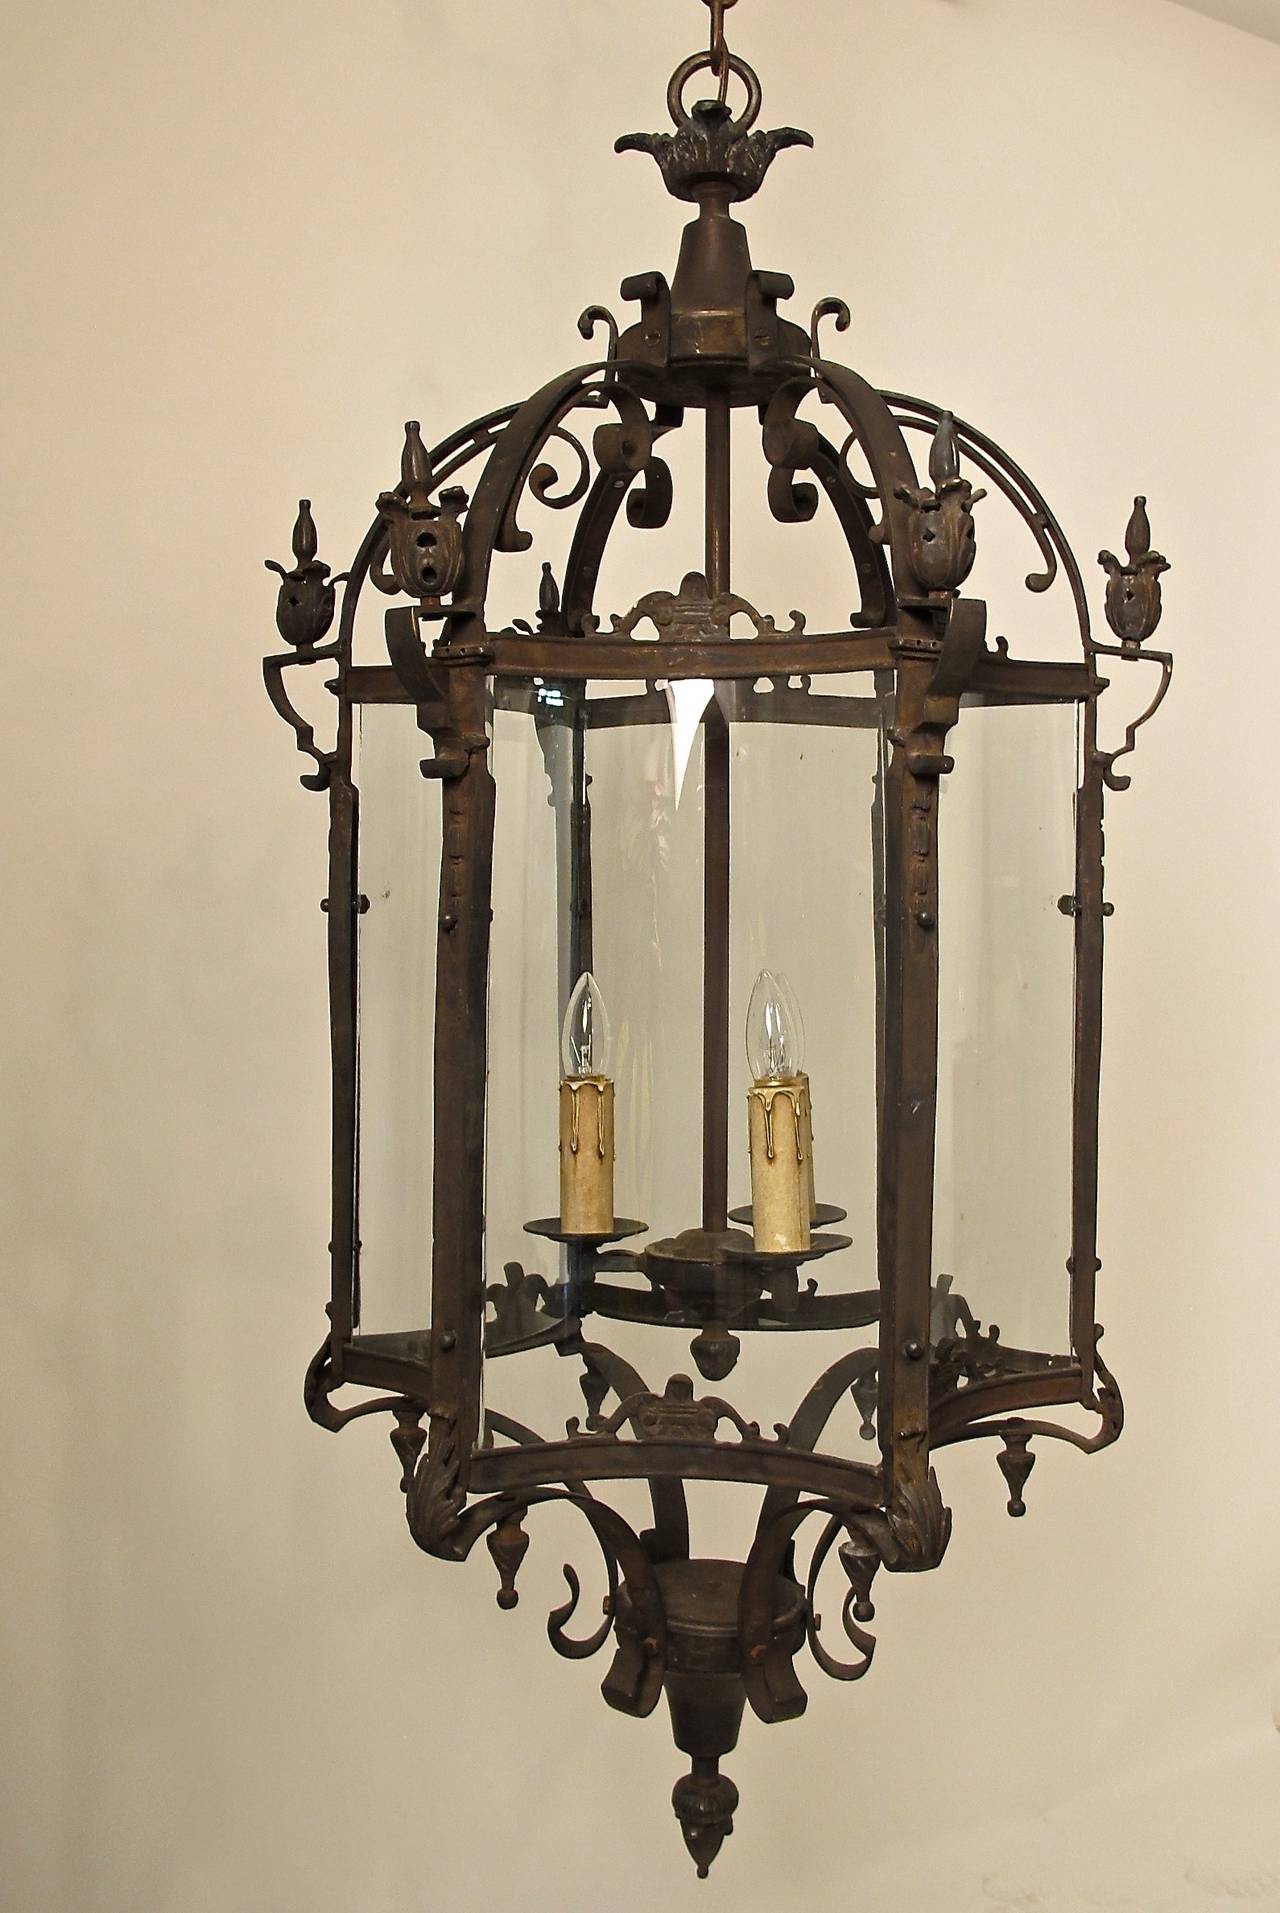 High quality bronze lantern with curved glass panels, bronze chain and canopy. Reconditioned and newly re-wired. The measured drop including chain is 87 inches, can be shortened if desired. European, mid 19th century.